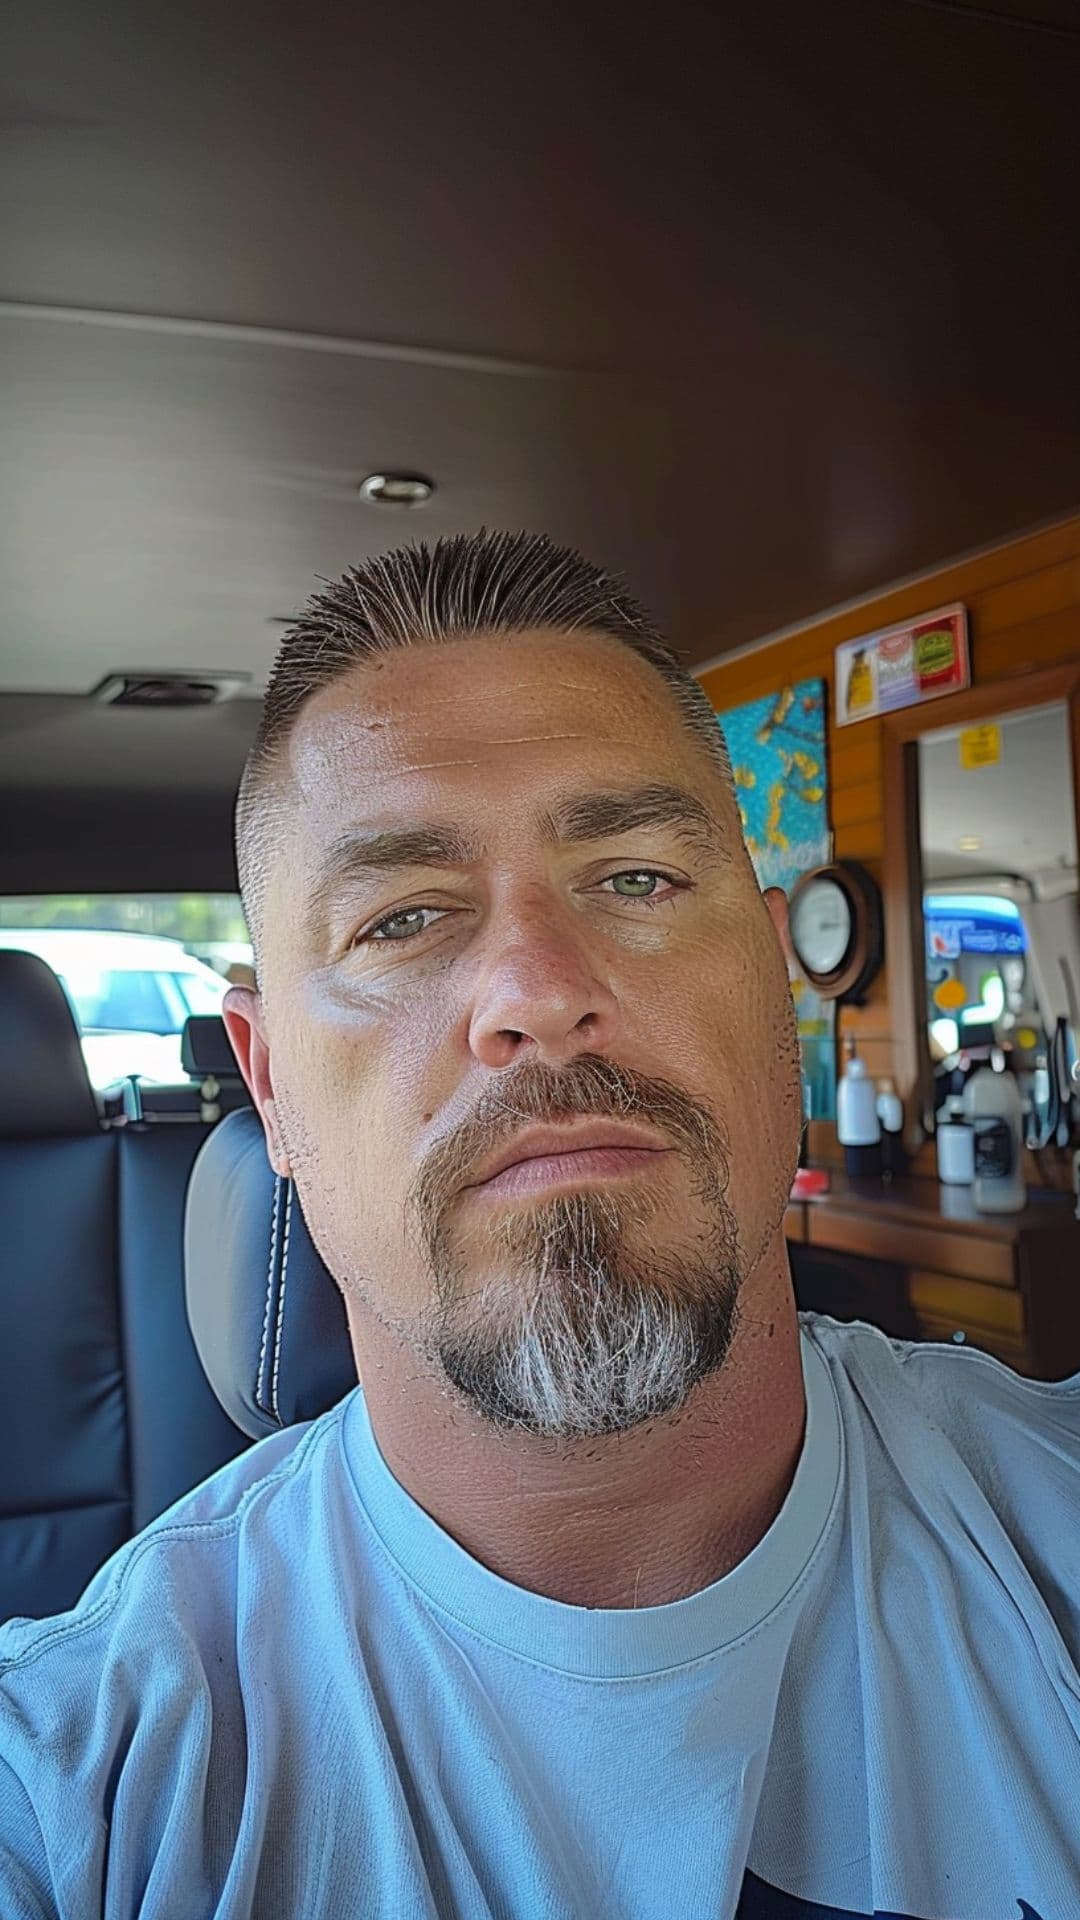 A man modelling a high and tight haircut with goatee.